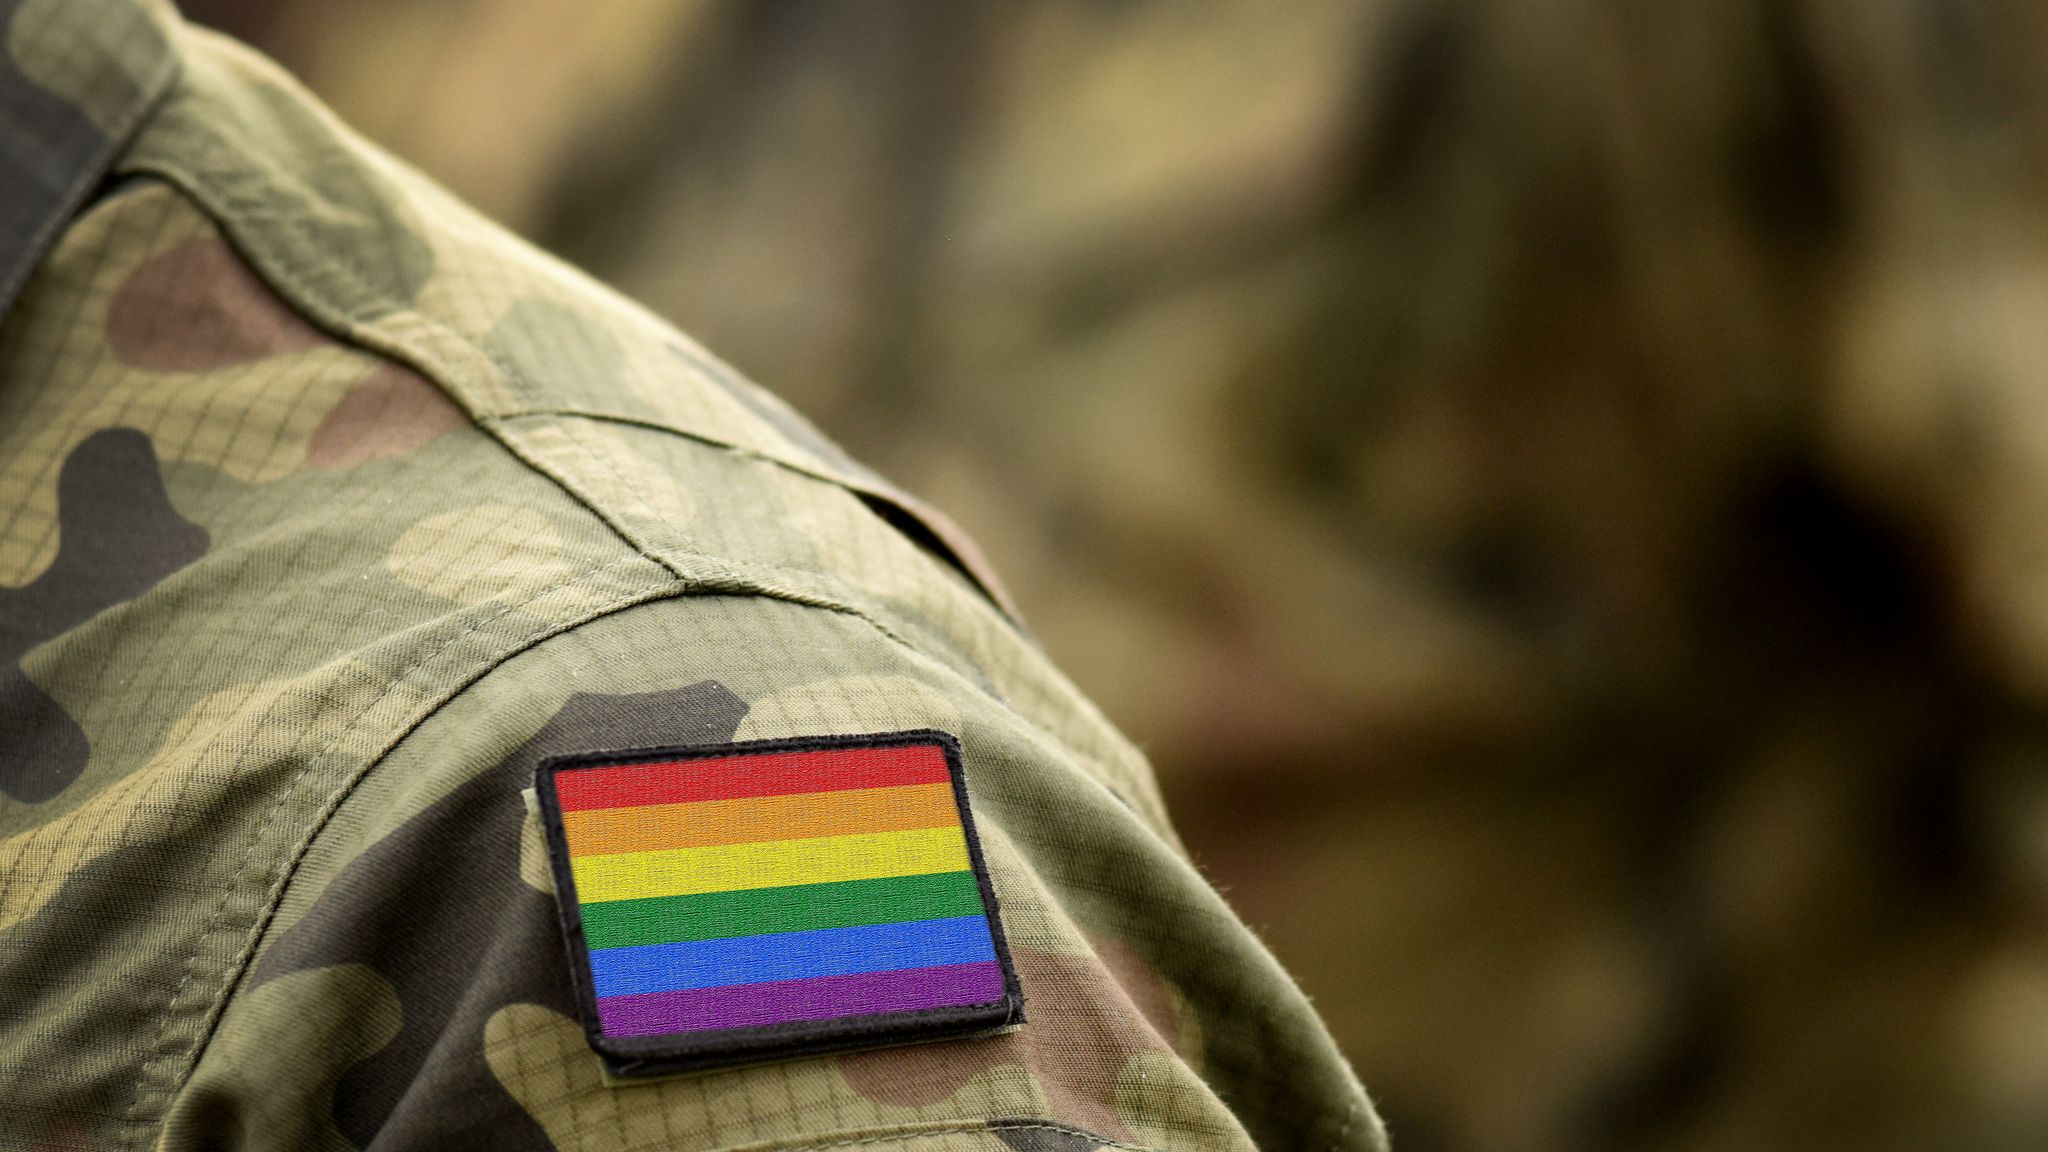 NSFW military facts - Been in for a long while now, the most apt descriptor I've heard: "Gayest bunch of straight dudes you'll ever meet." u/Tak_Jaehon